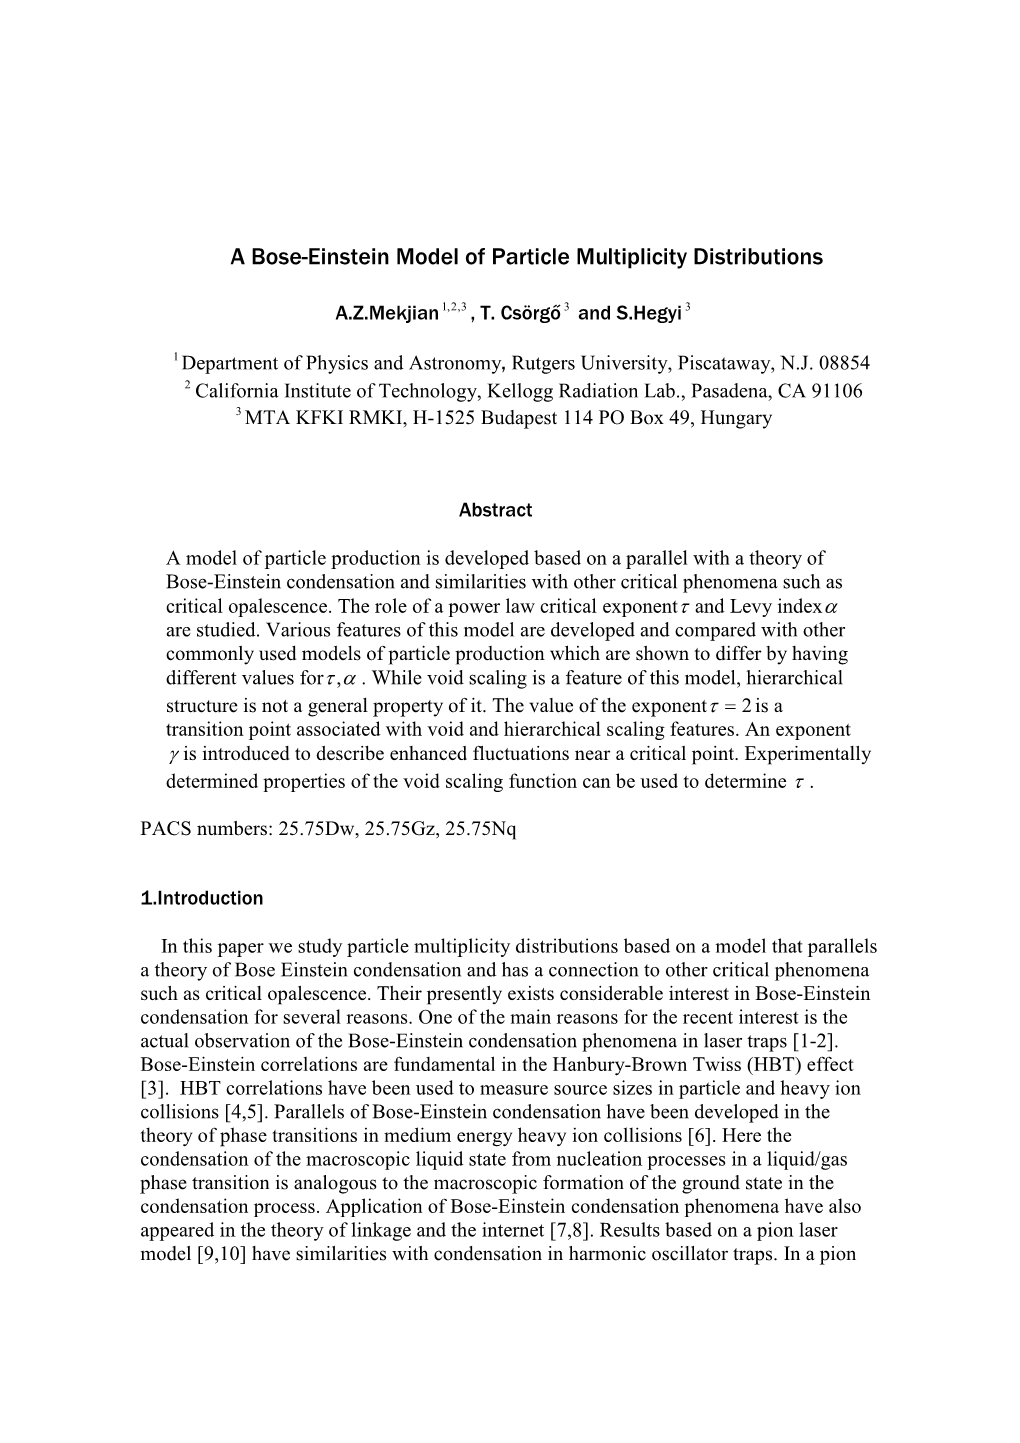 A Bose-Einstein Model of Particle Multiplicity Distributions